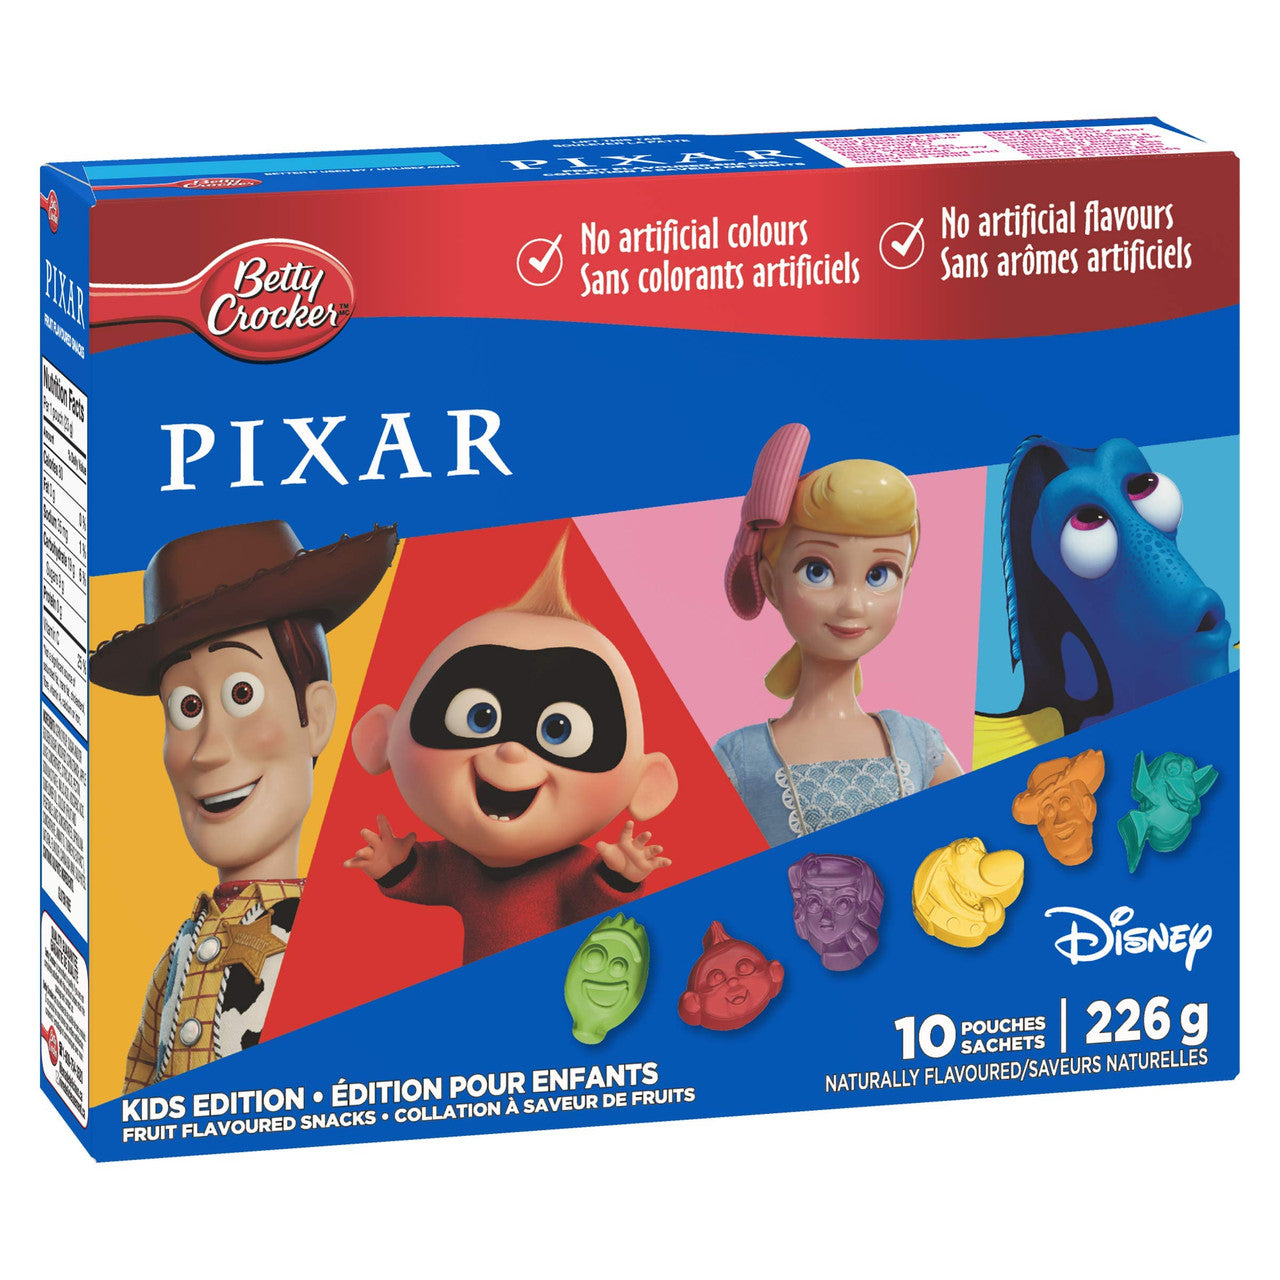 Betty Crocker Gluten Free Pixar Fruit Snacks, 10 Pouches, 226g/8 oz., {Imported from Canada}